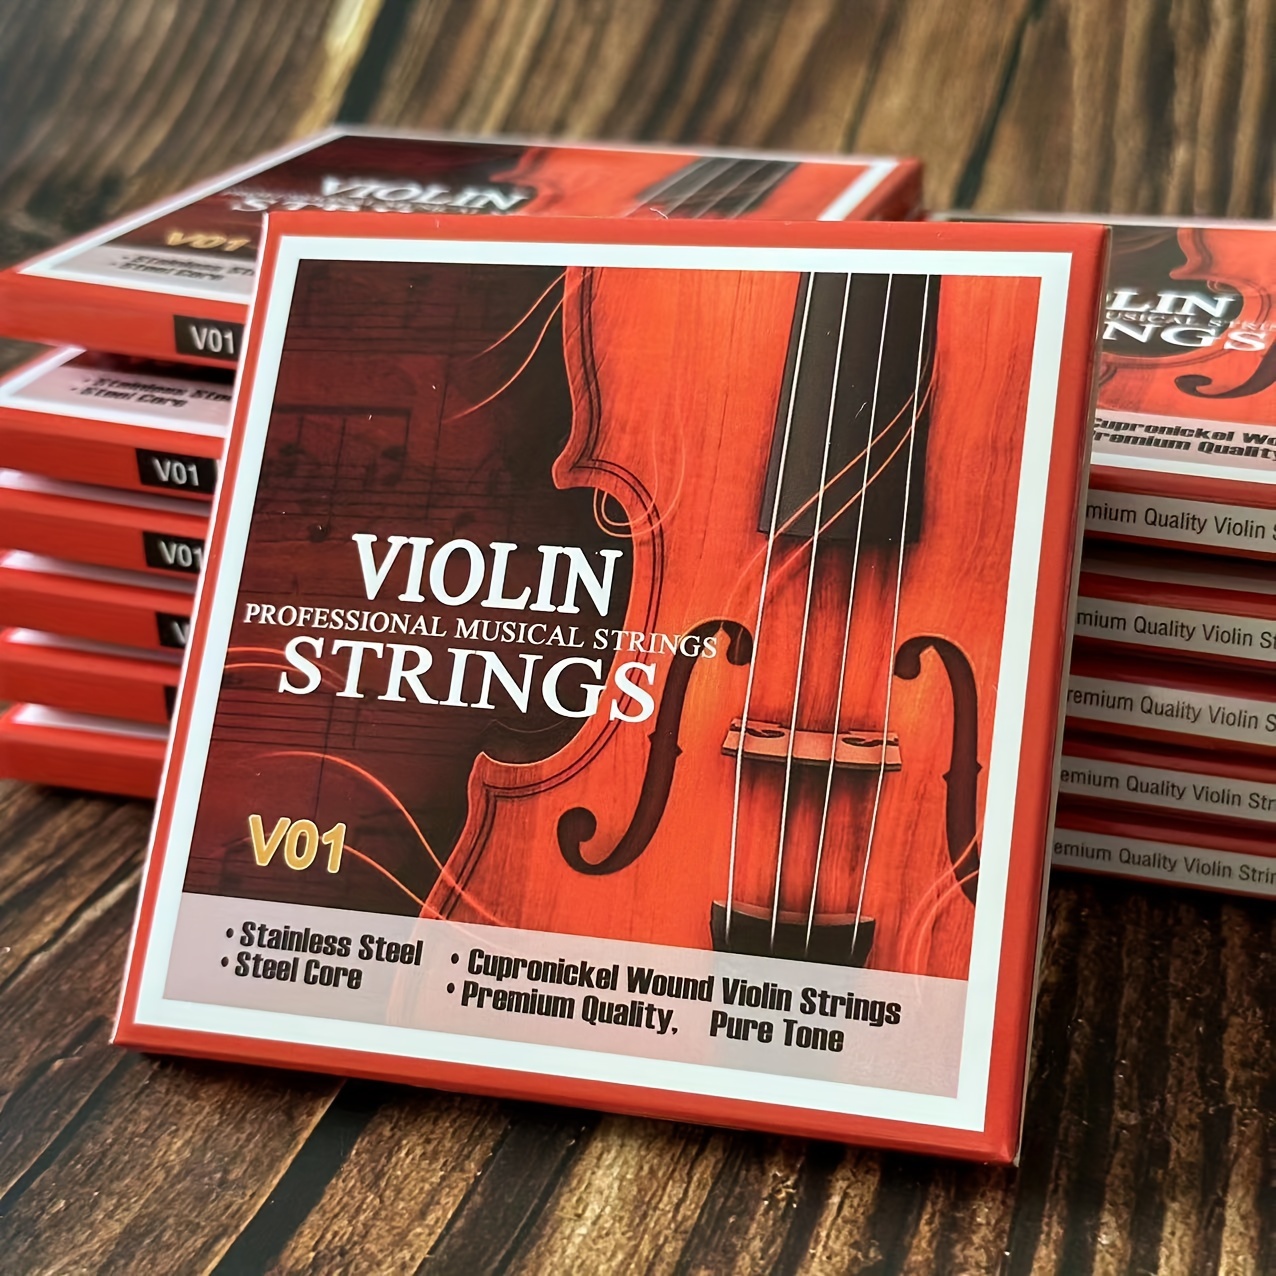 

Violin Strings Universal Full Set (g-d-a-e) - Steel Core - Cupronickel Wound - Fiddle String - Medium Gauge - Steel Ball - End E For 4/4 3/4 1/2 1/4 Violins